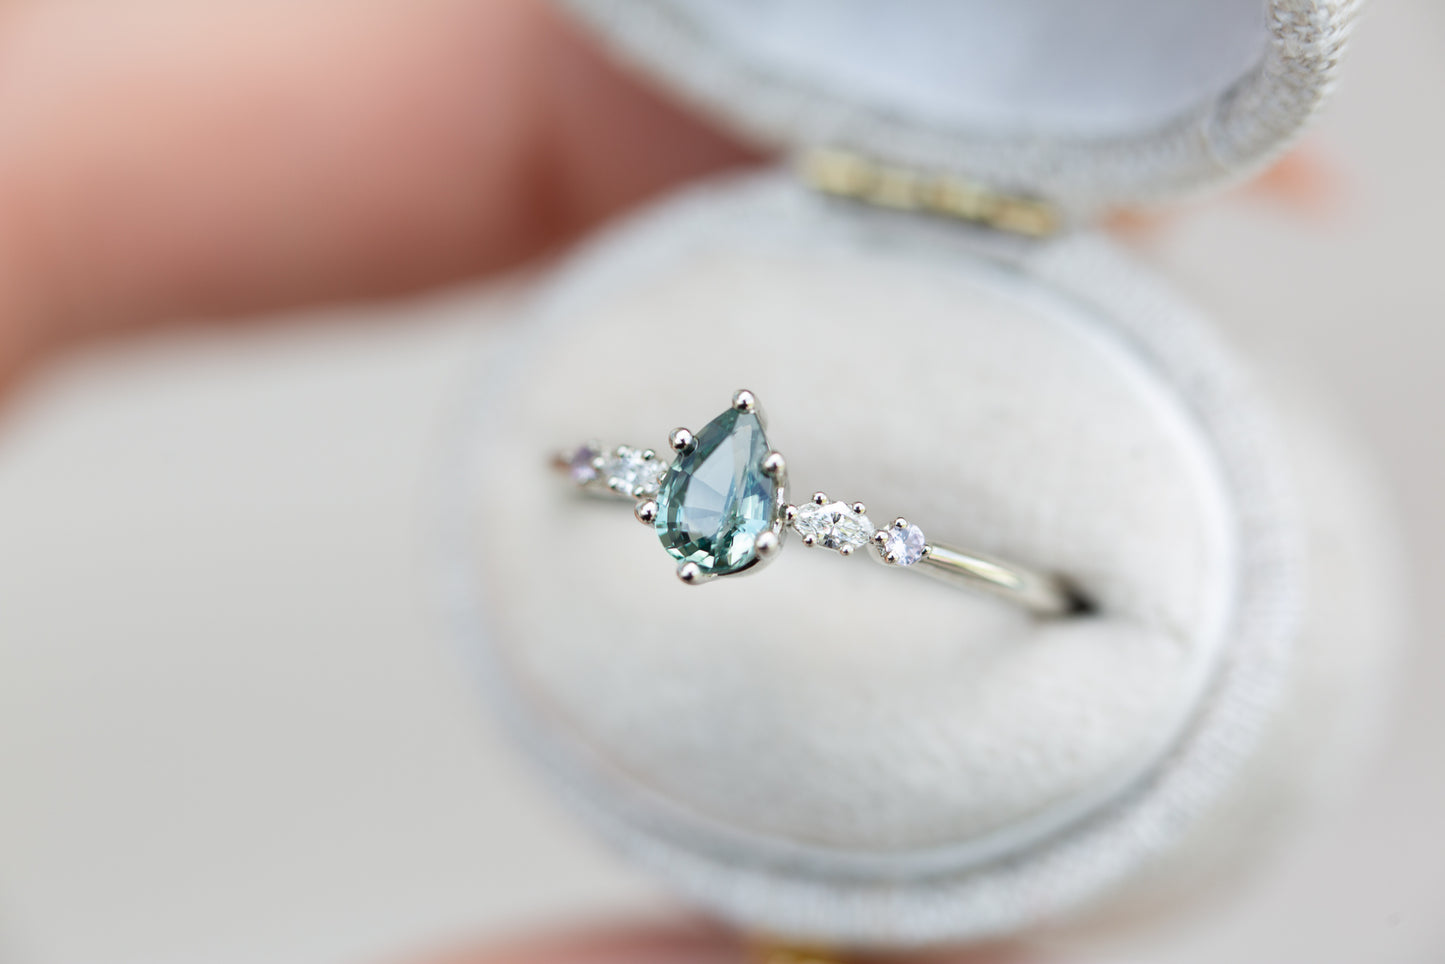 Load image into Gallery viewer, Pear teal Montana sapphire five stone ring with diamonds and lavender sapphire
